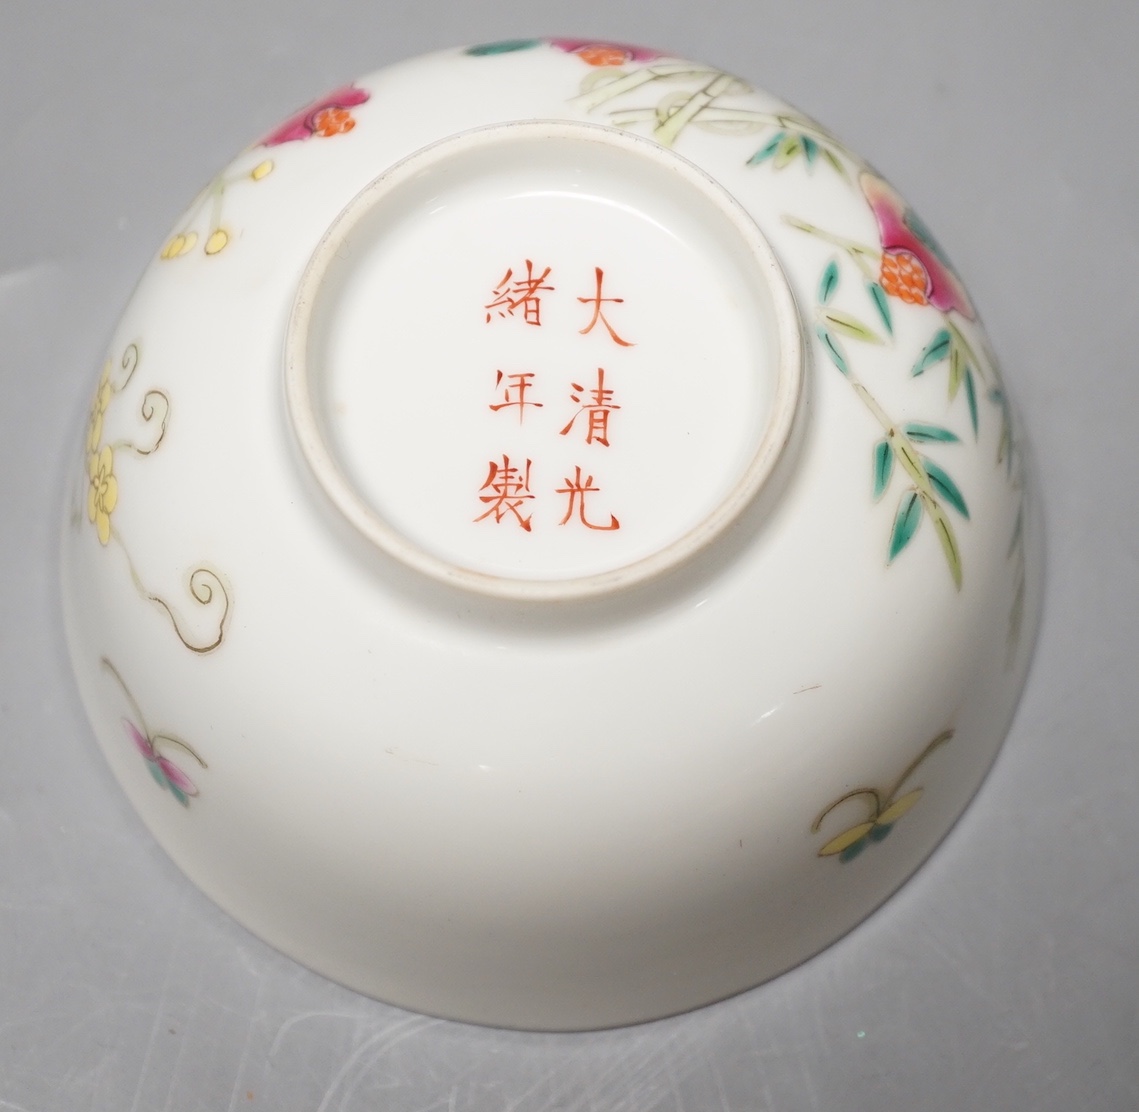 A Chinese famille rose ‘pomegranate’ bowl - 6.5cm high